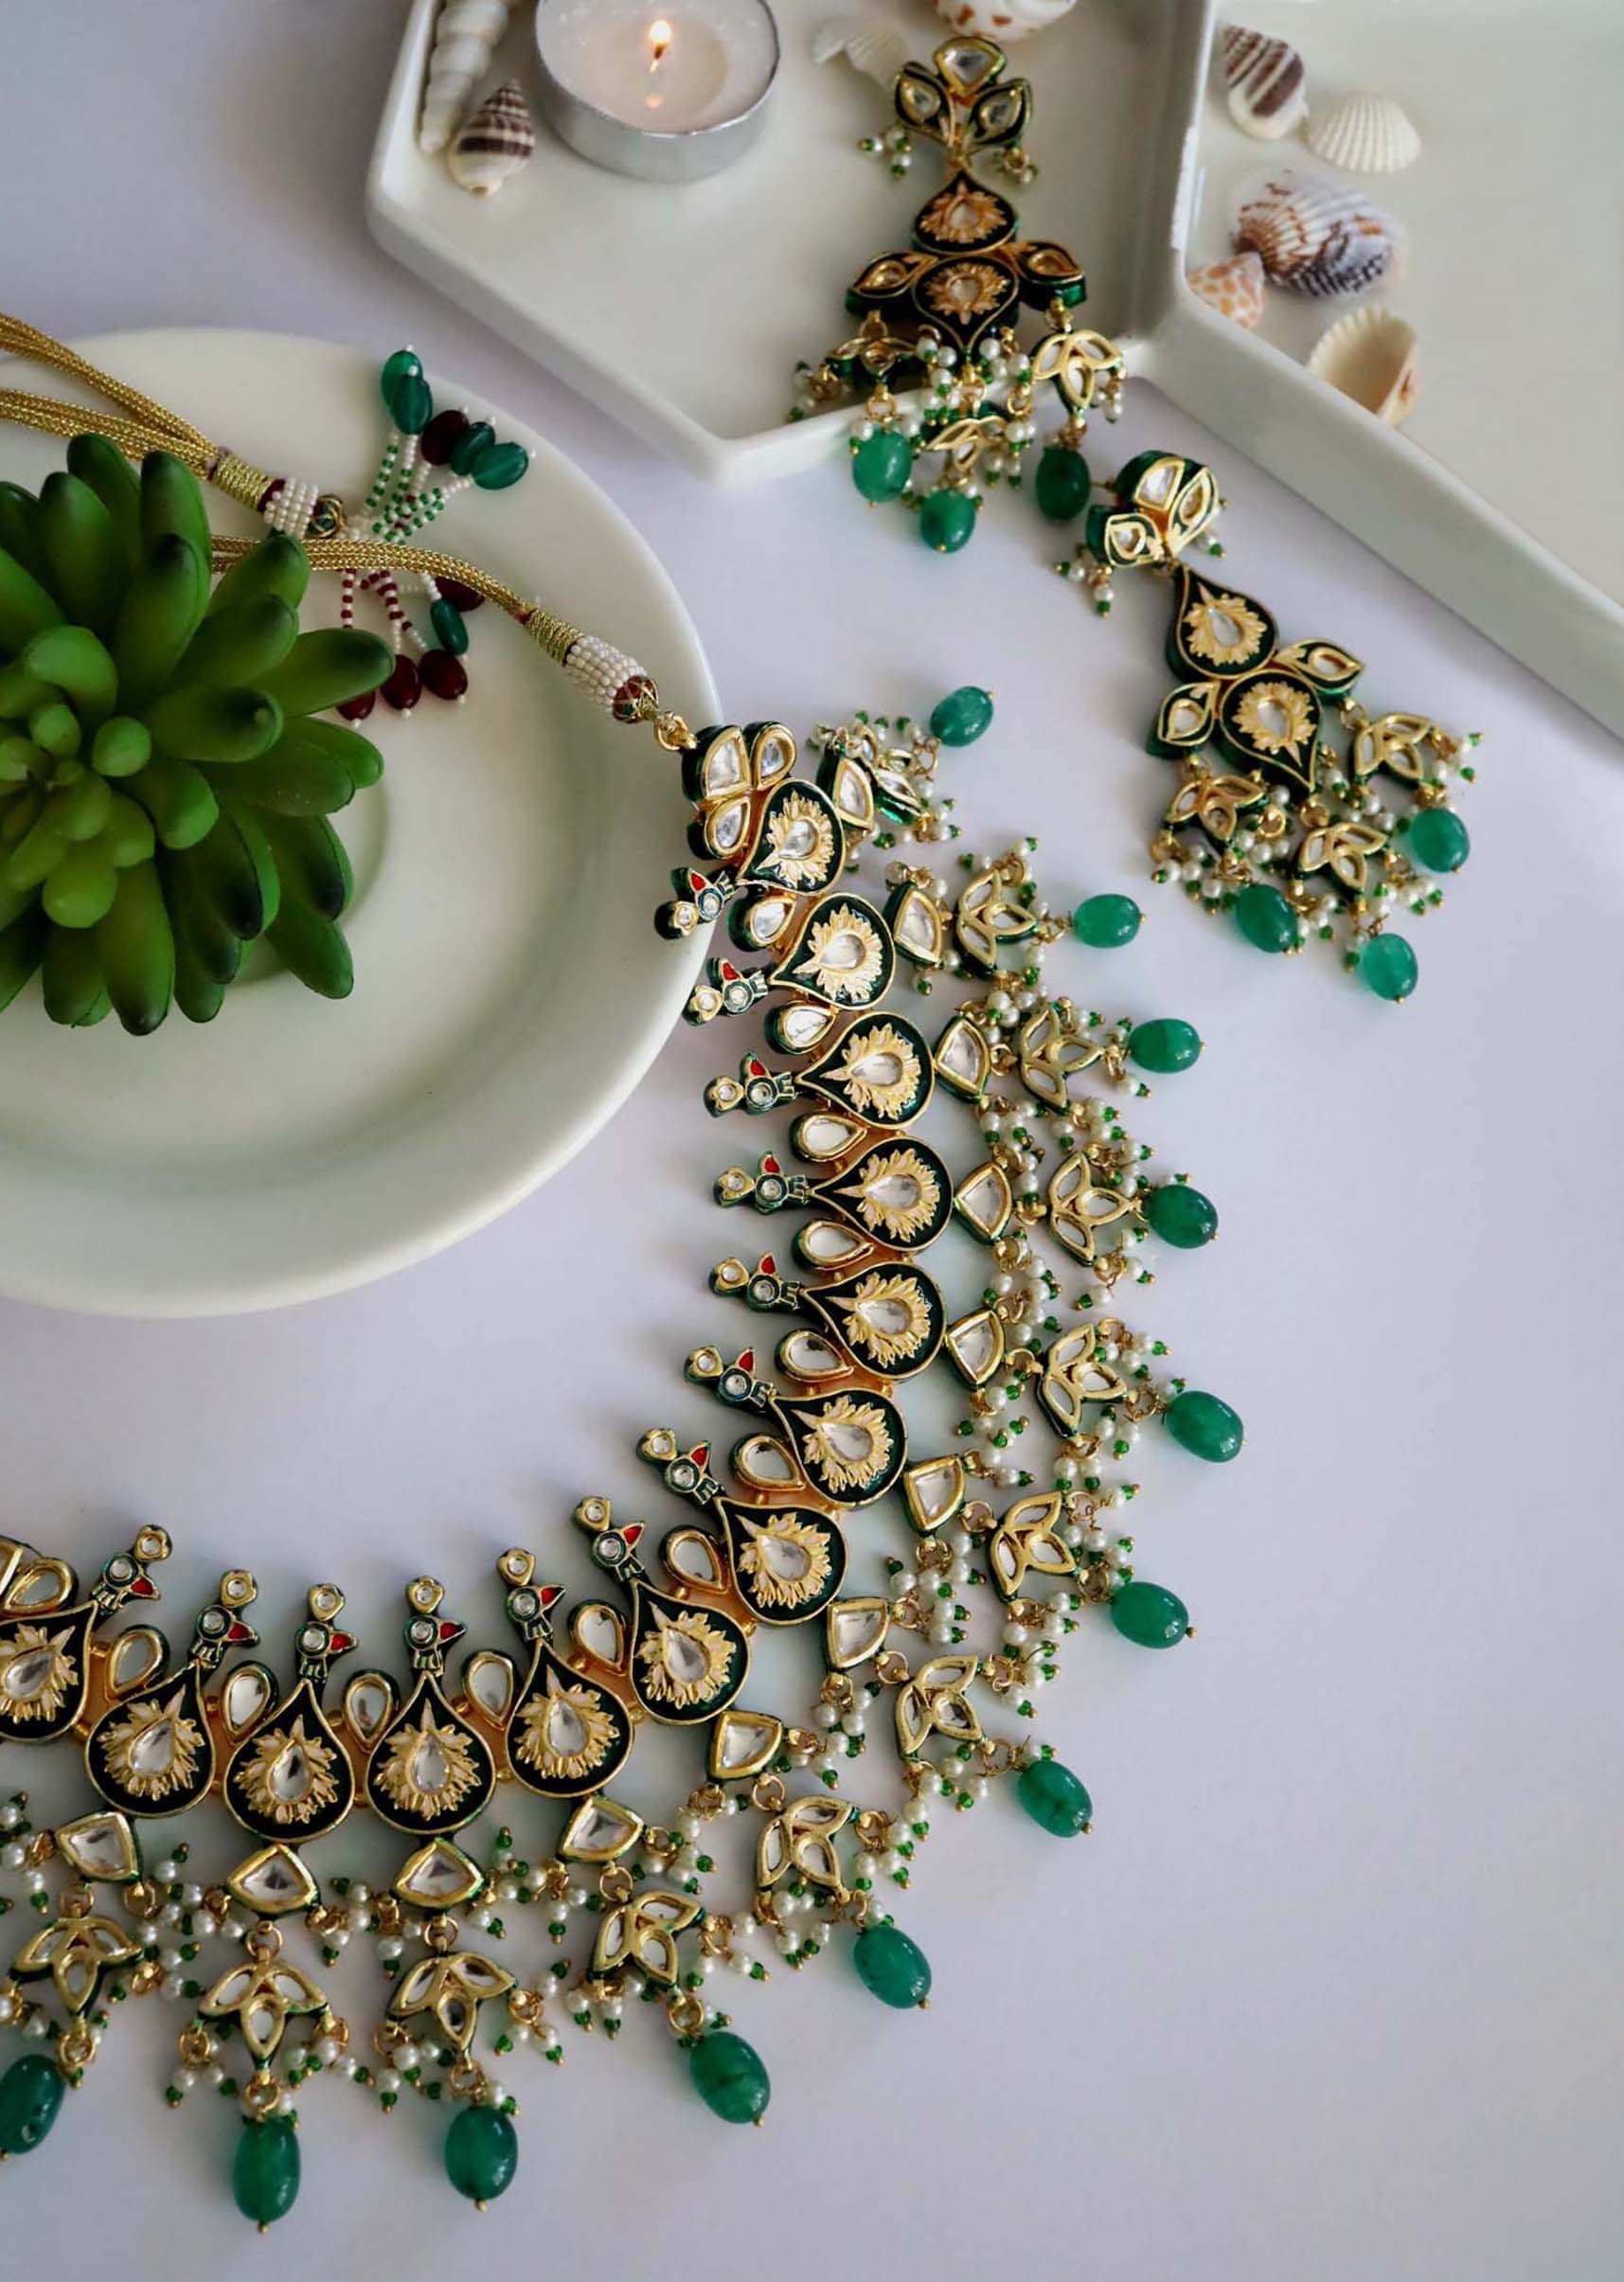 Green Collar Necklace And Earrings Set Inspired From Peacocks With Kundan And Stones By Paisley Pop